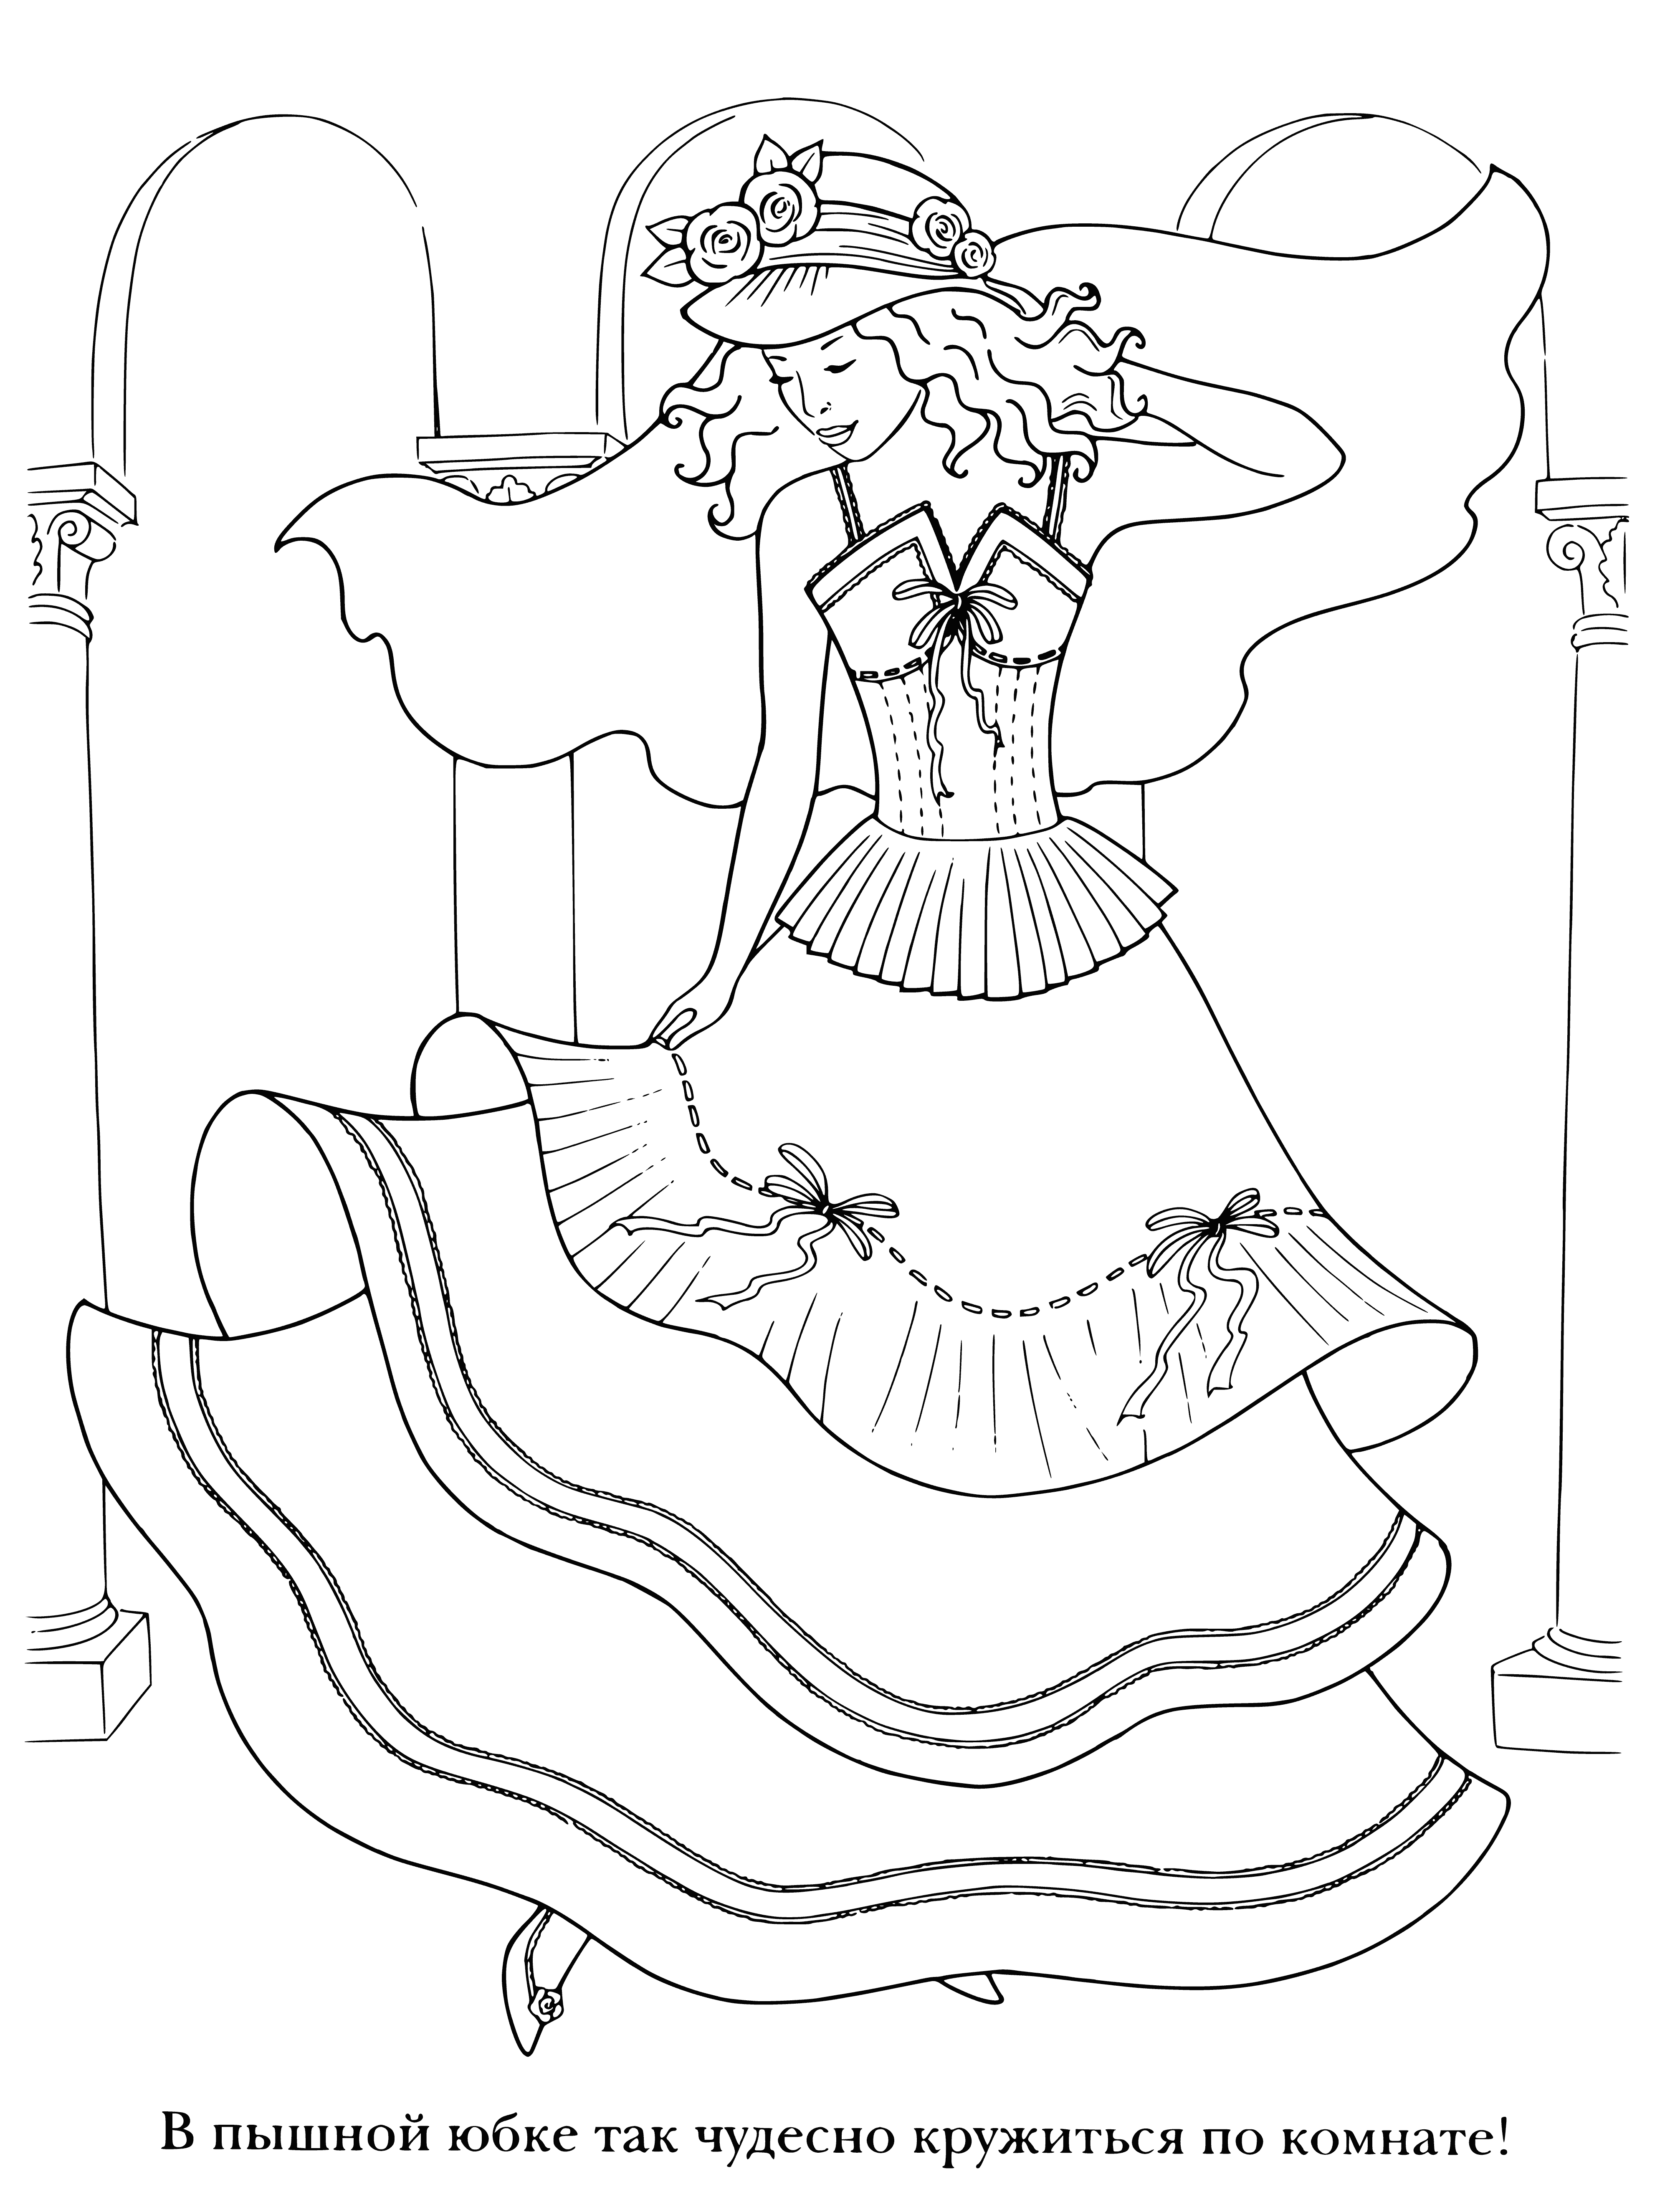 coloring page: Bride stands in front of window in wedding dress with fluffy skirt, fitted bodice & veil, holding bouquet of flowers.